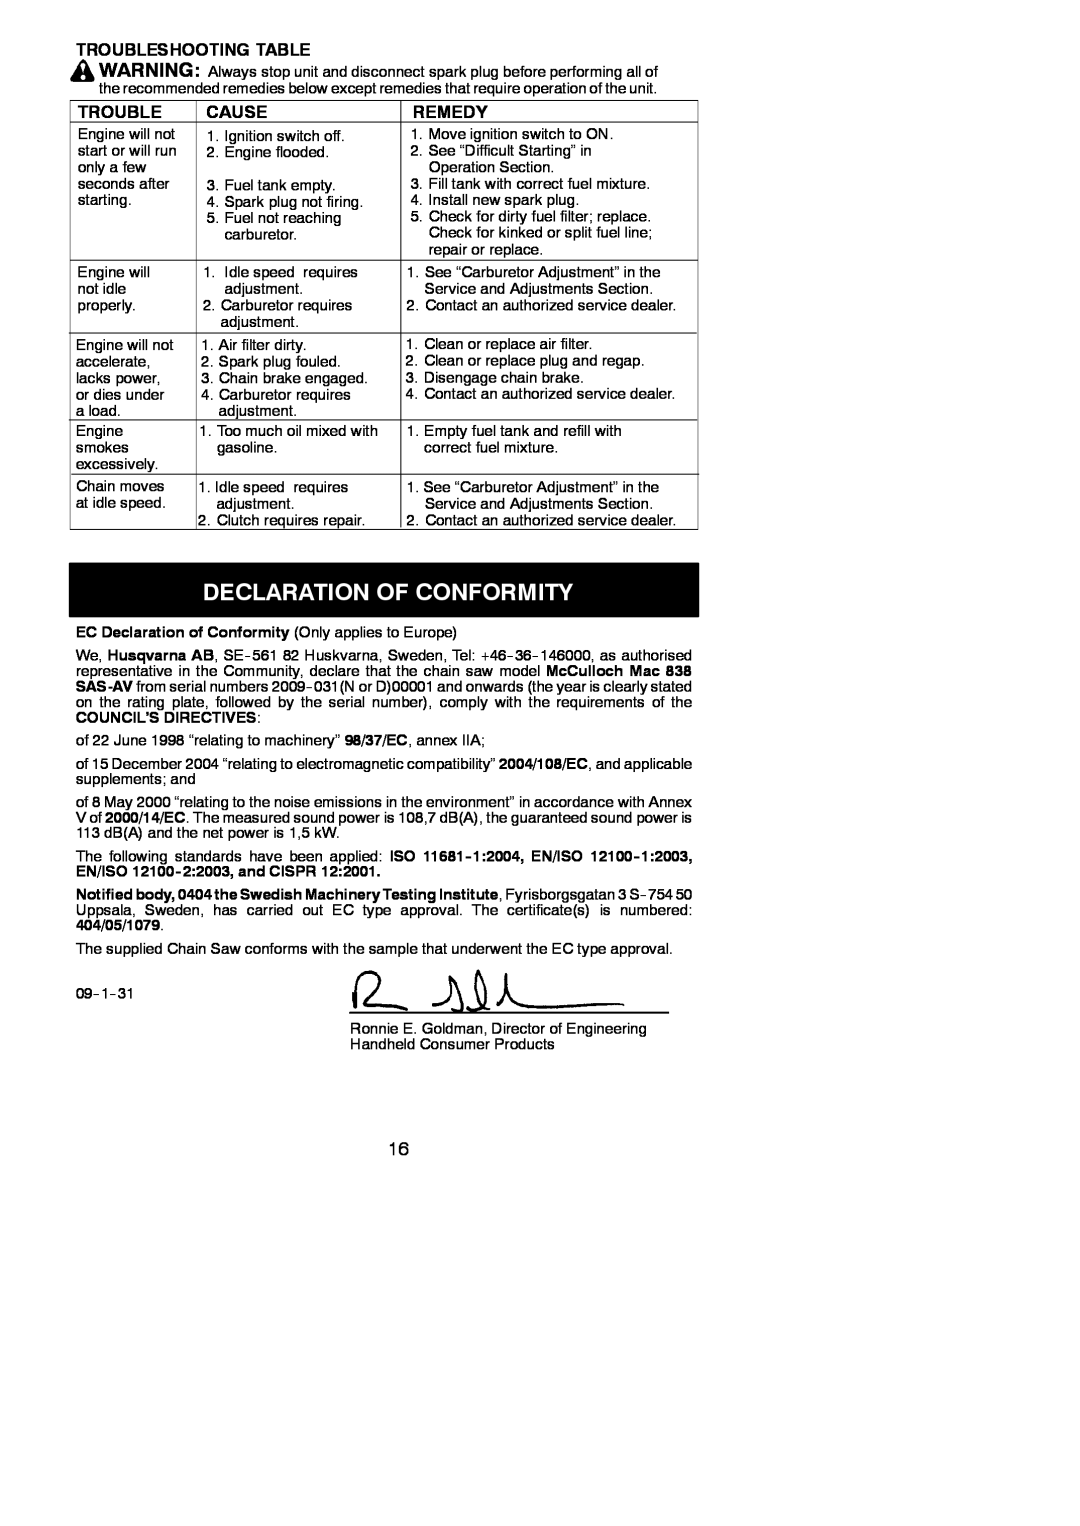 McCulloch MAC 838 instruction manual Declaration Of Conformity, Troubleshooting Table, Cause, Remedy, Council’S Directives 